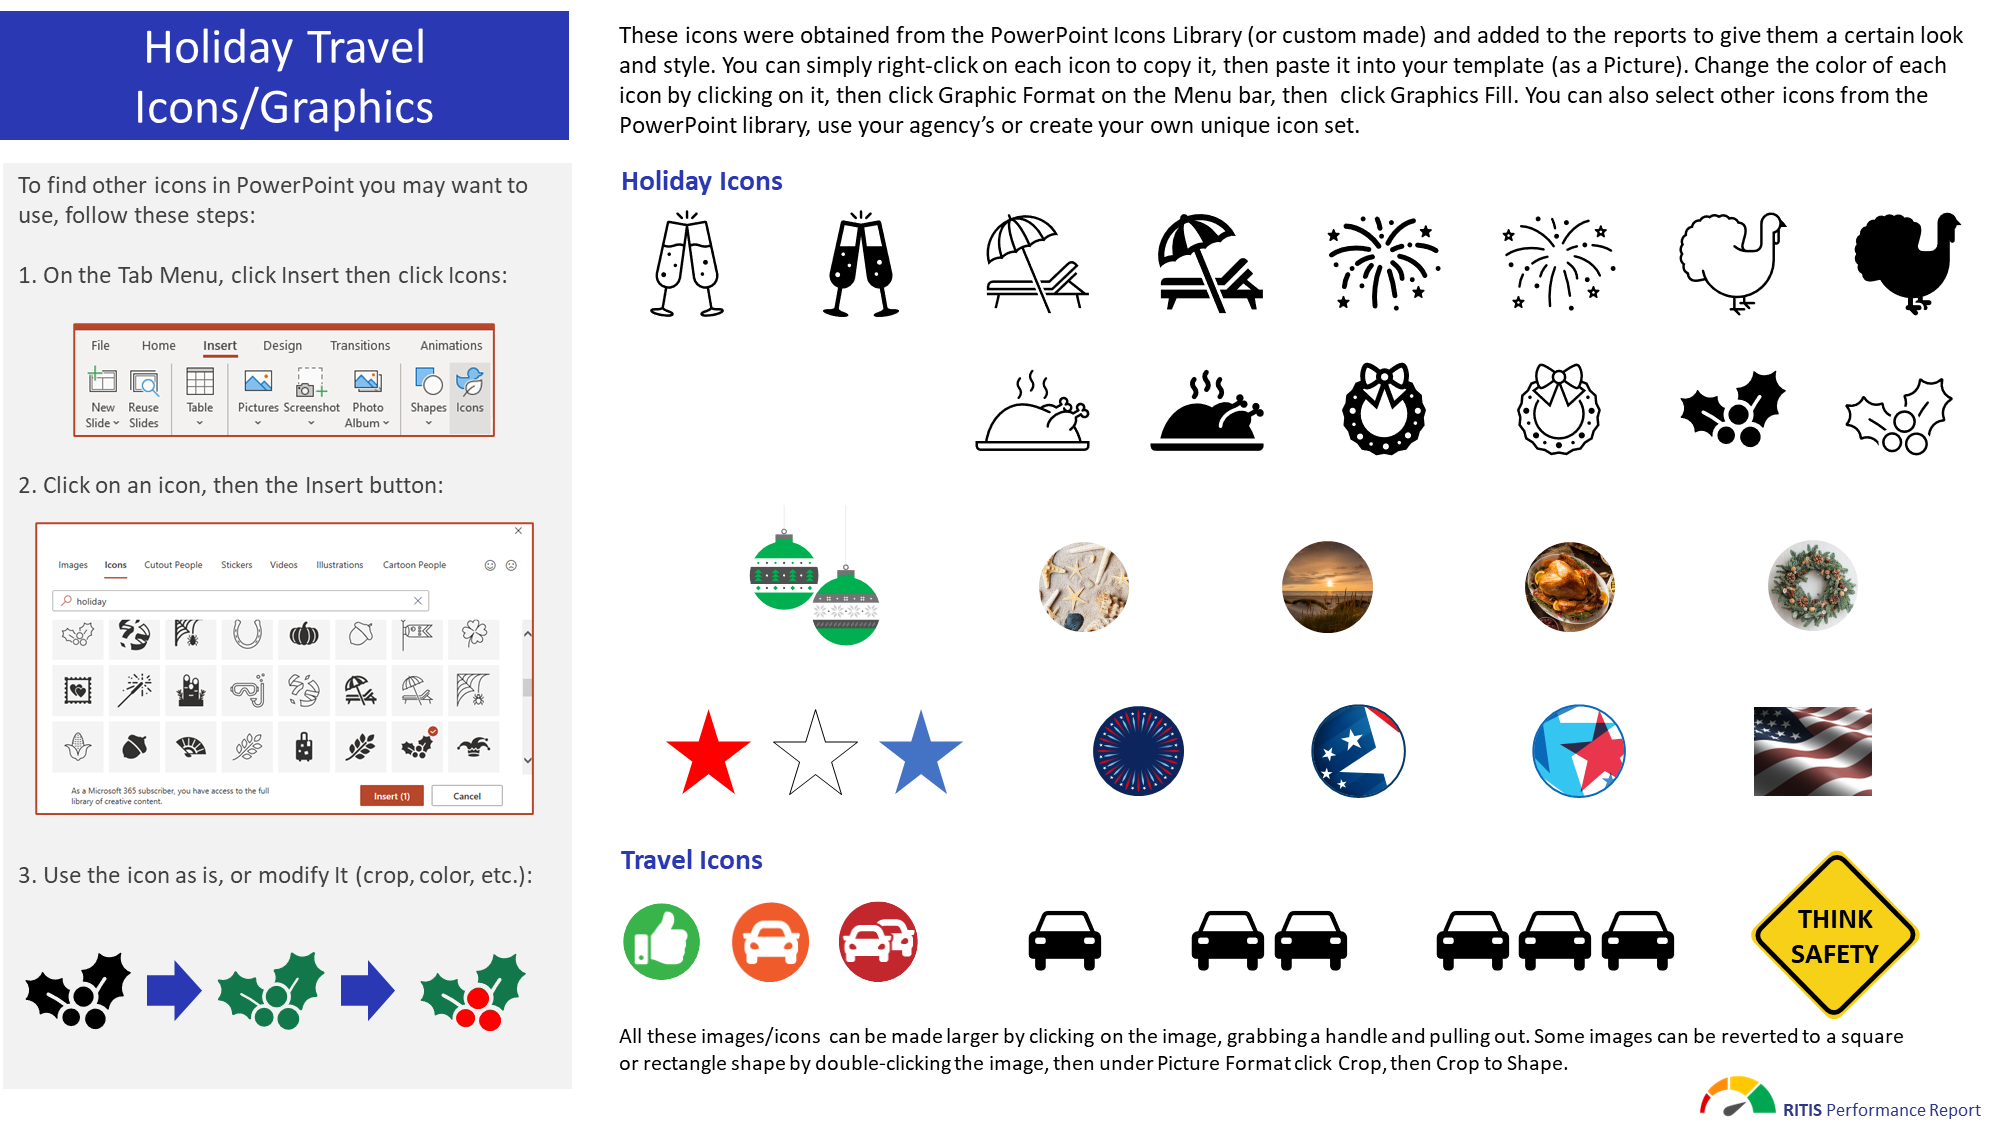 Screenshot of a PowerPoint slide full of icons and images representing a wide variety of holidays